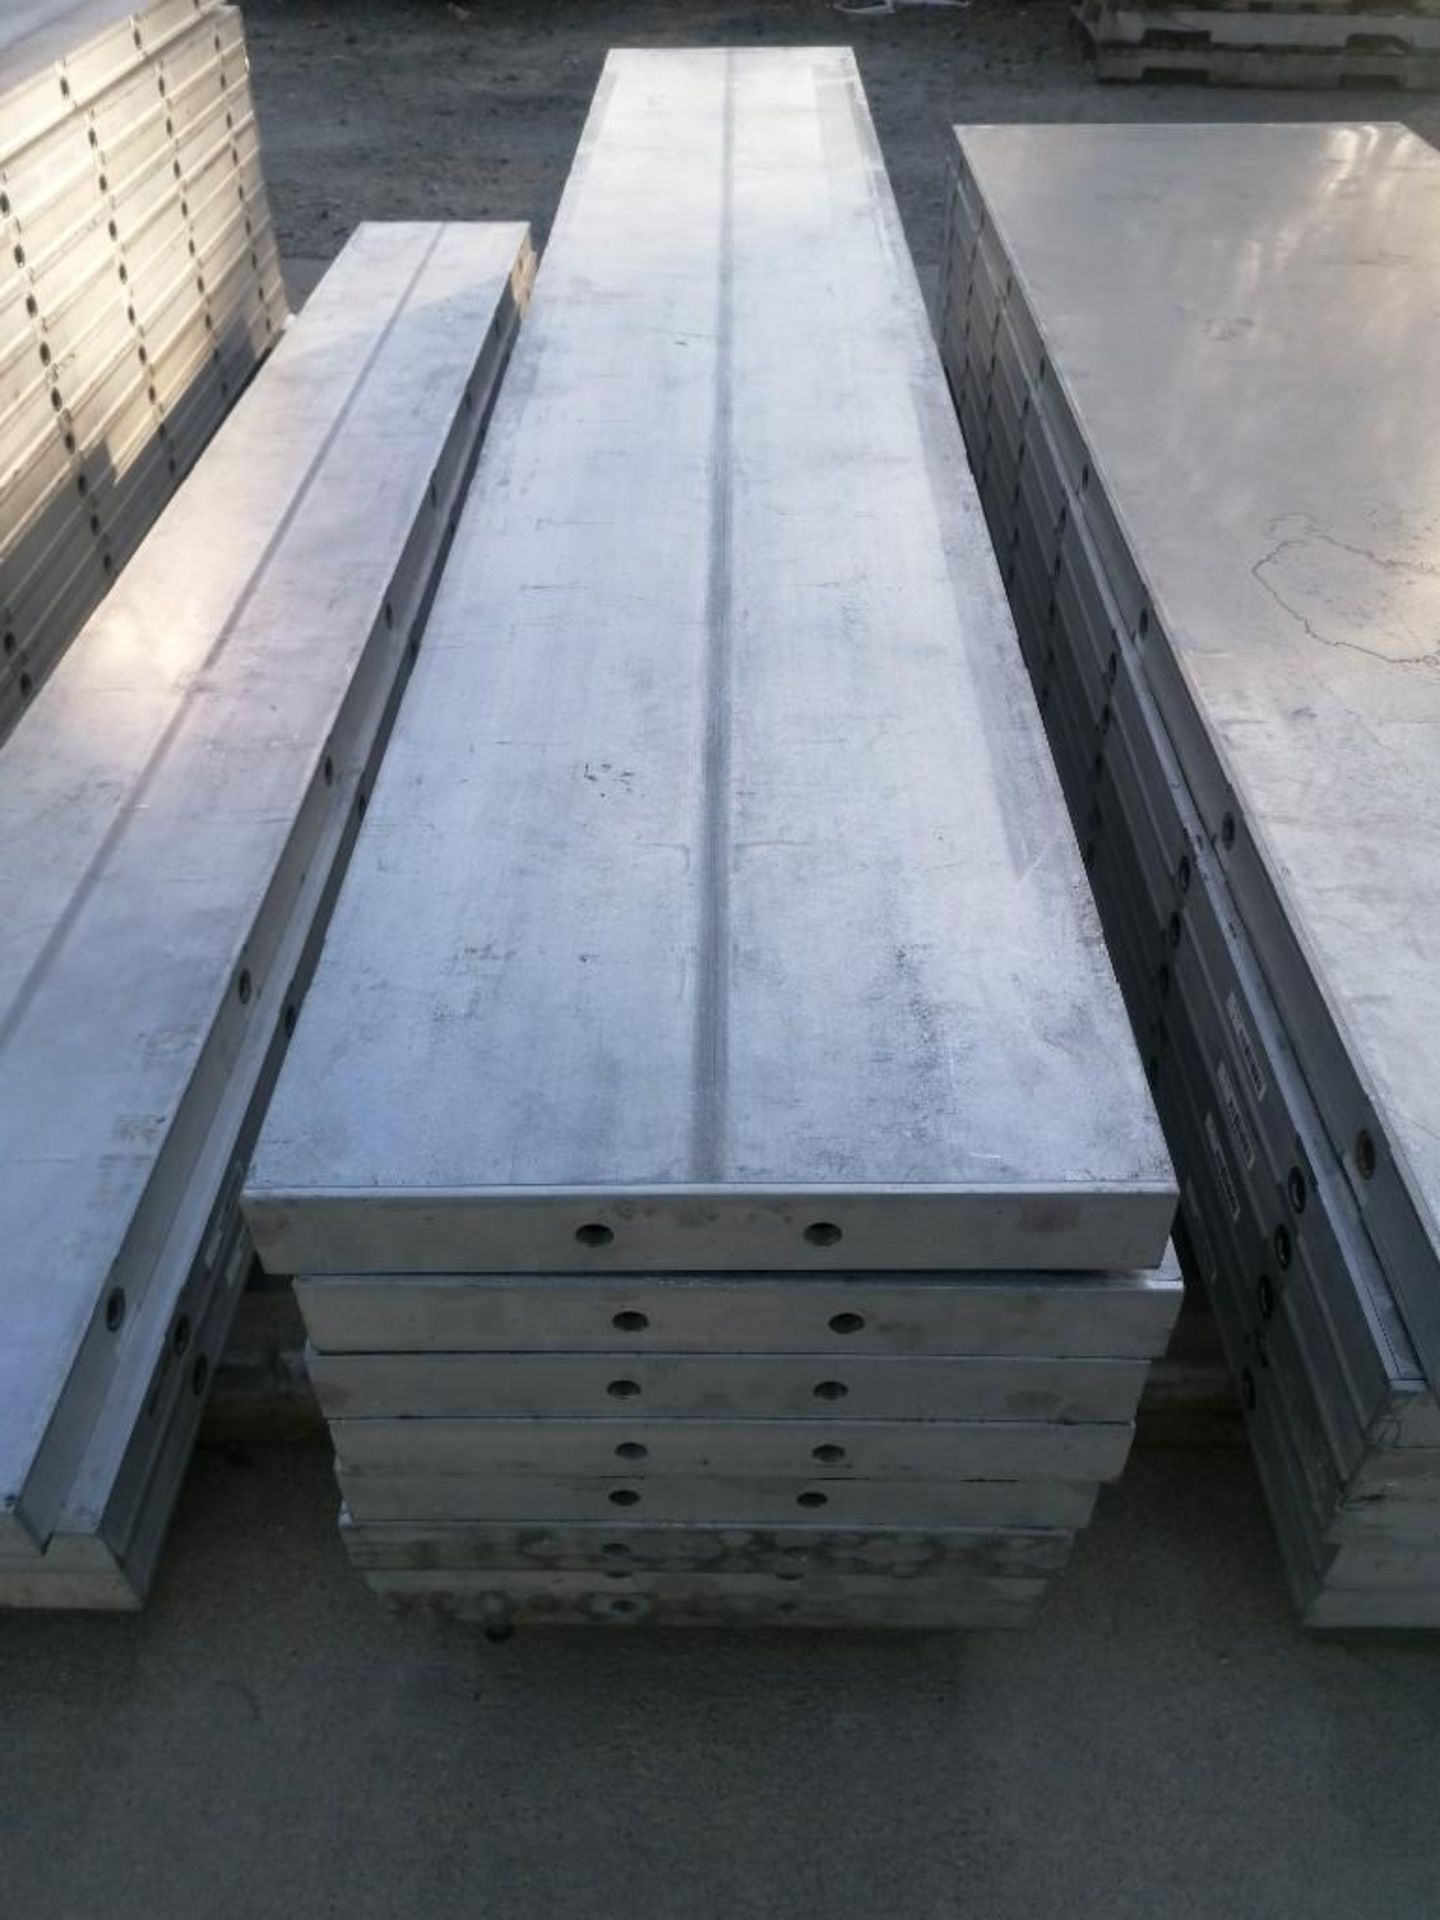 (8) 16" x 8' NEW Badger Smooth Aluminum Concrete Forms 6-12 Hole Pattern. Located in Mt. Pleasant, - Image 2 of 4